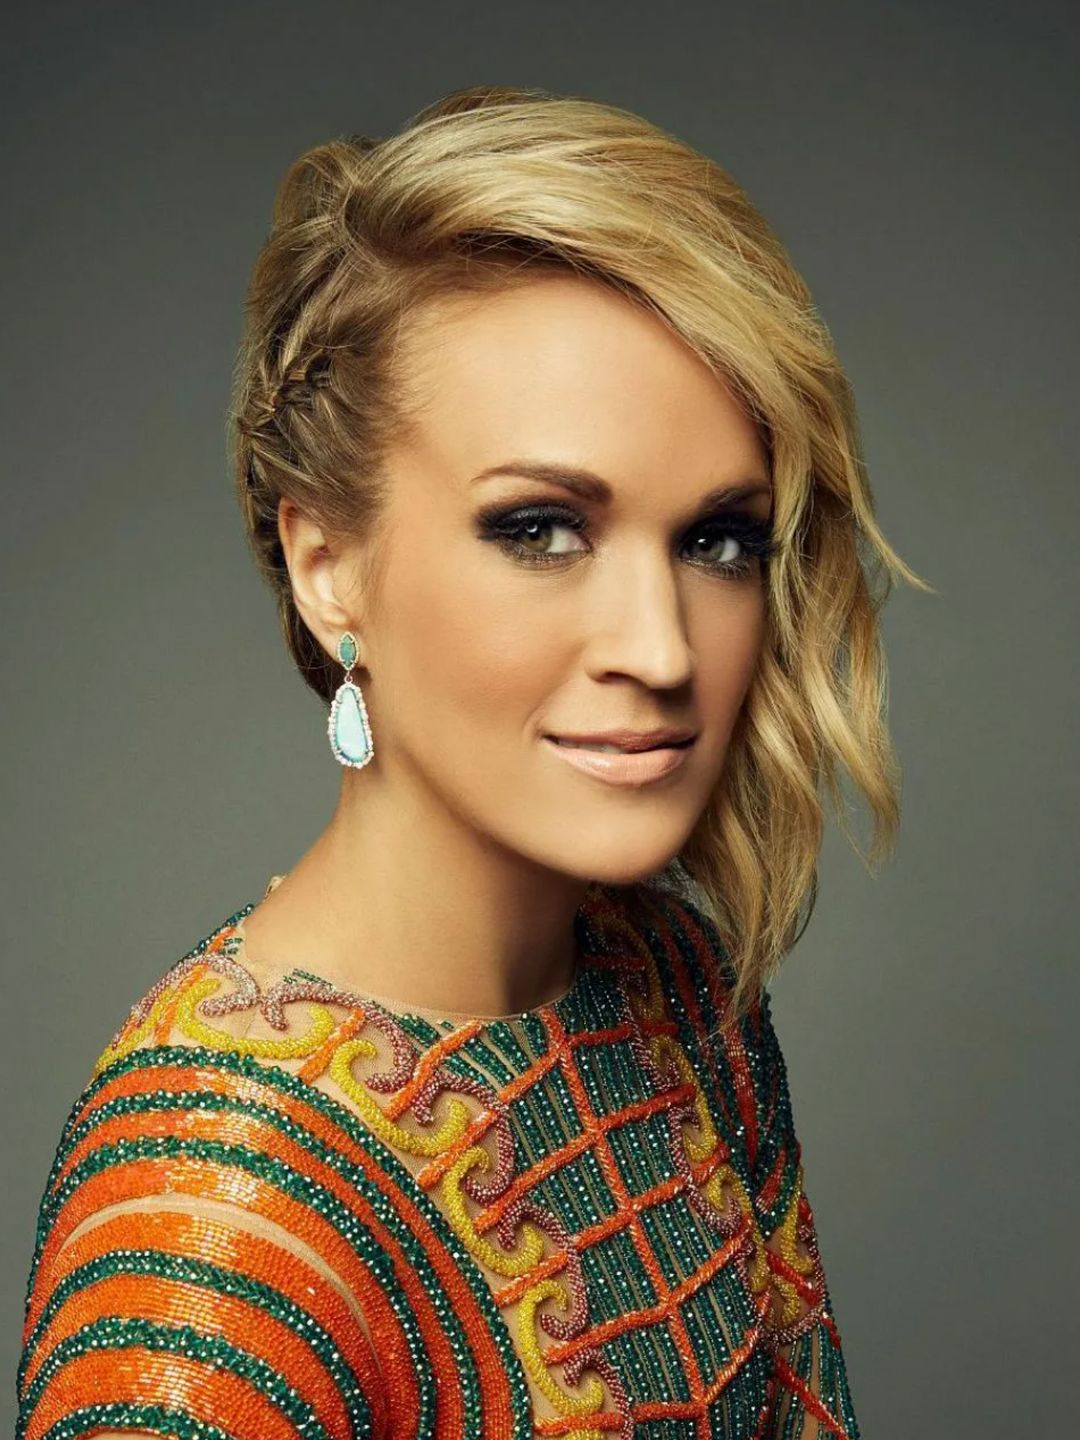 Carrie Underwood how old is she